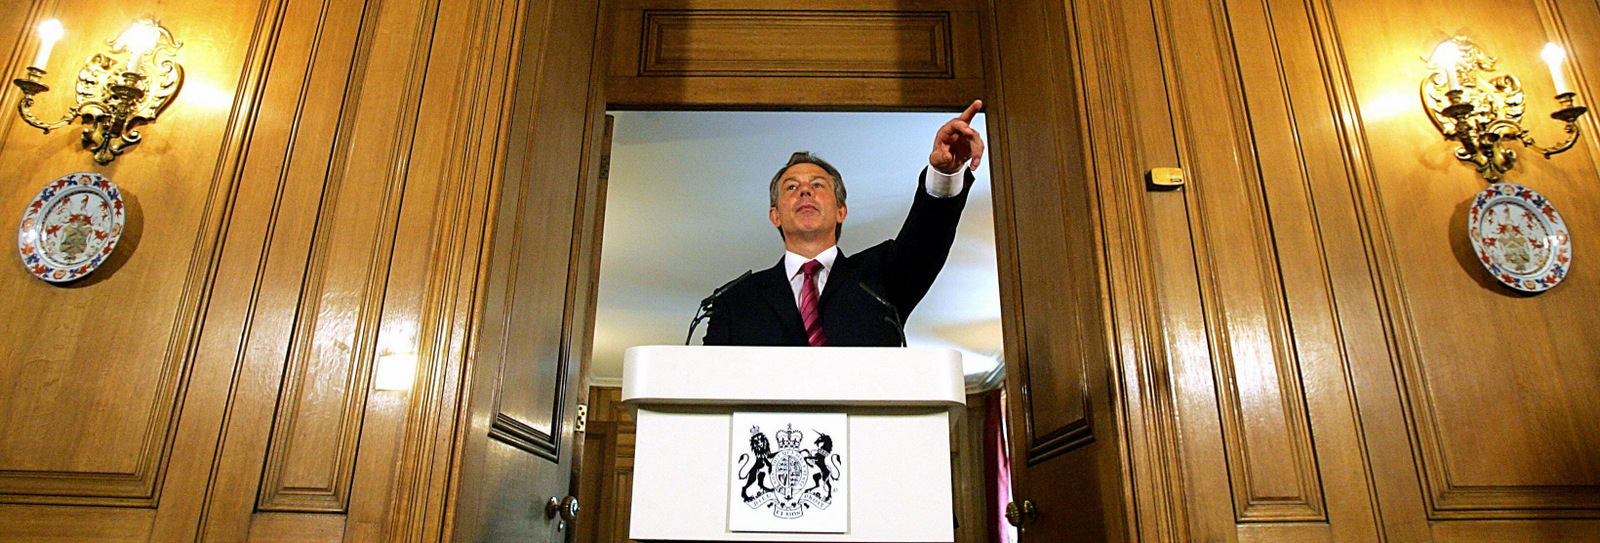 Britain's Prime Minister Tony Blair speaks to the media during his monthly press conference at 10 Downing street, in London, June 15 2004, where he insisted that he had been right to take military action against Iraq. (AP /Odd Andersen)